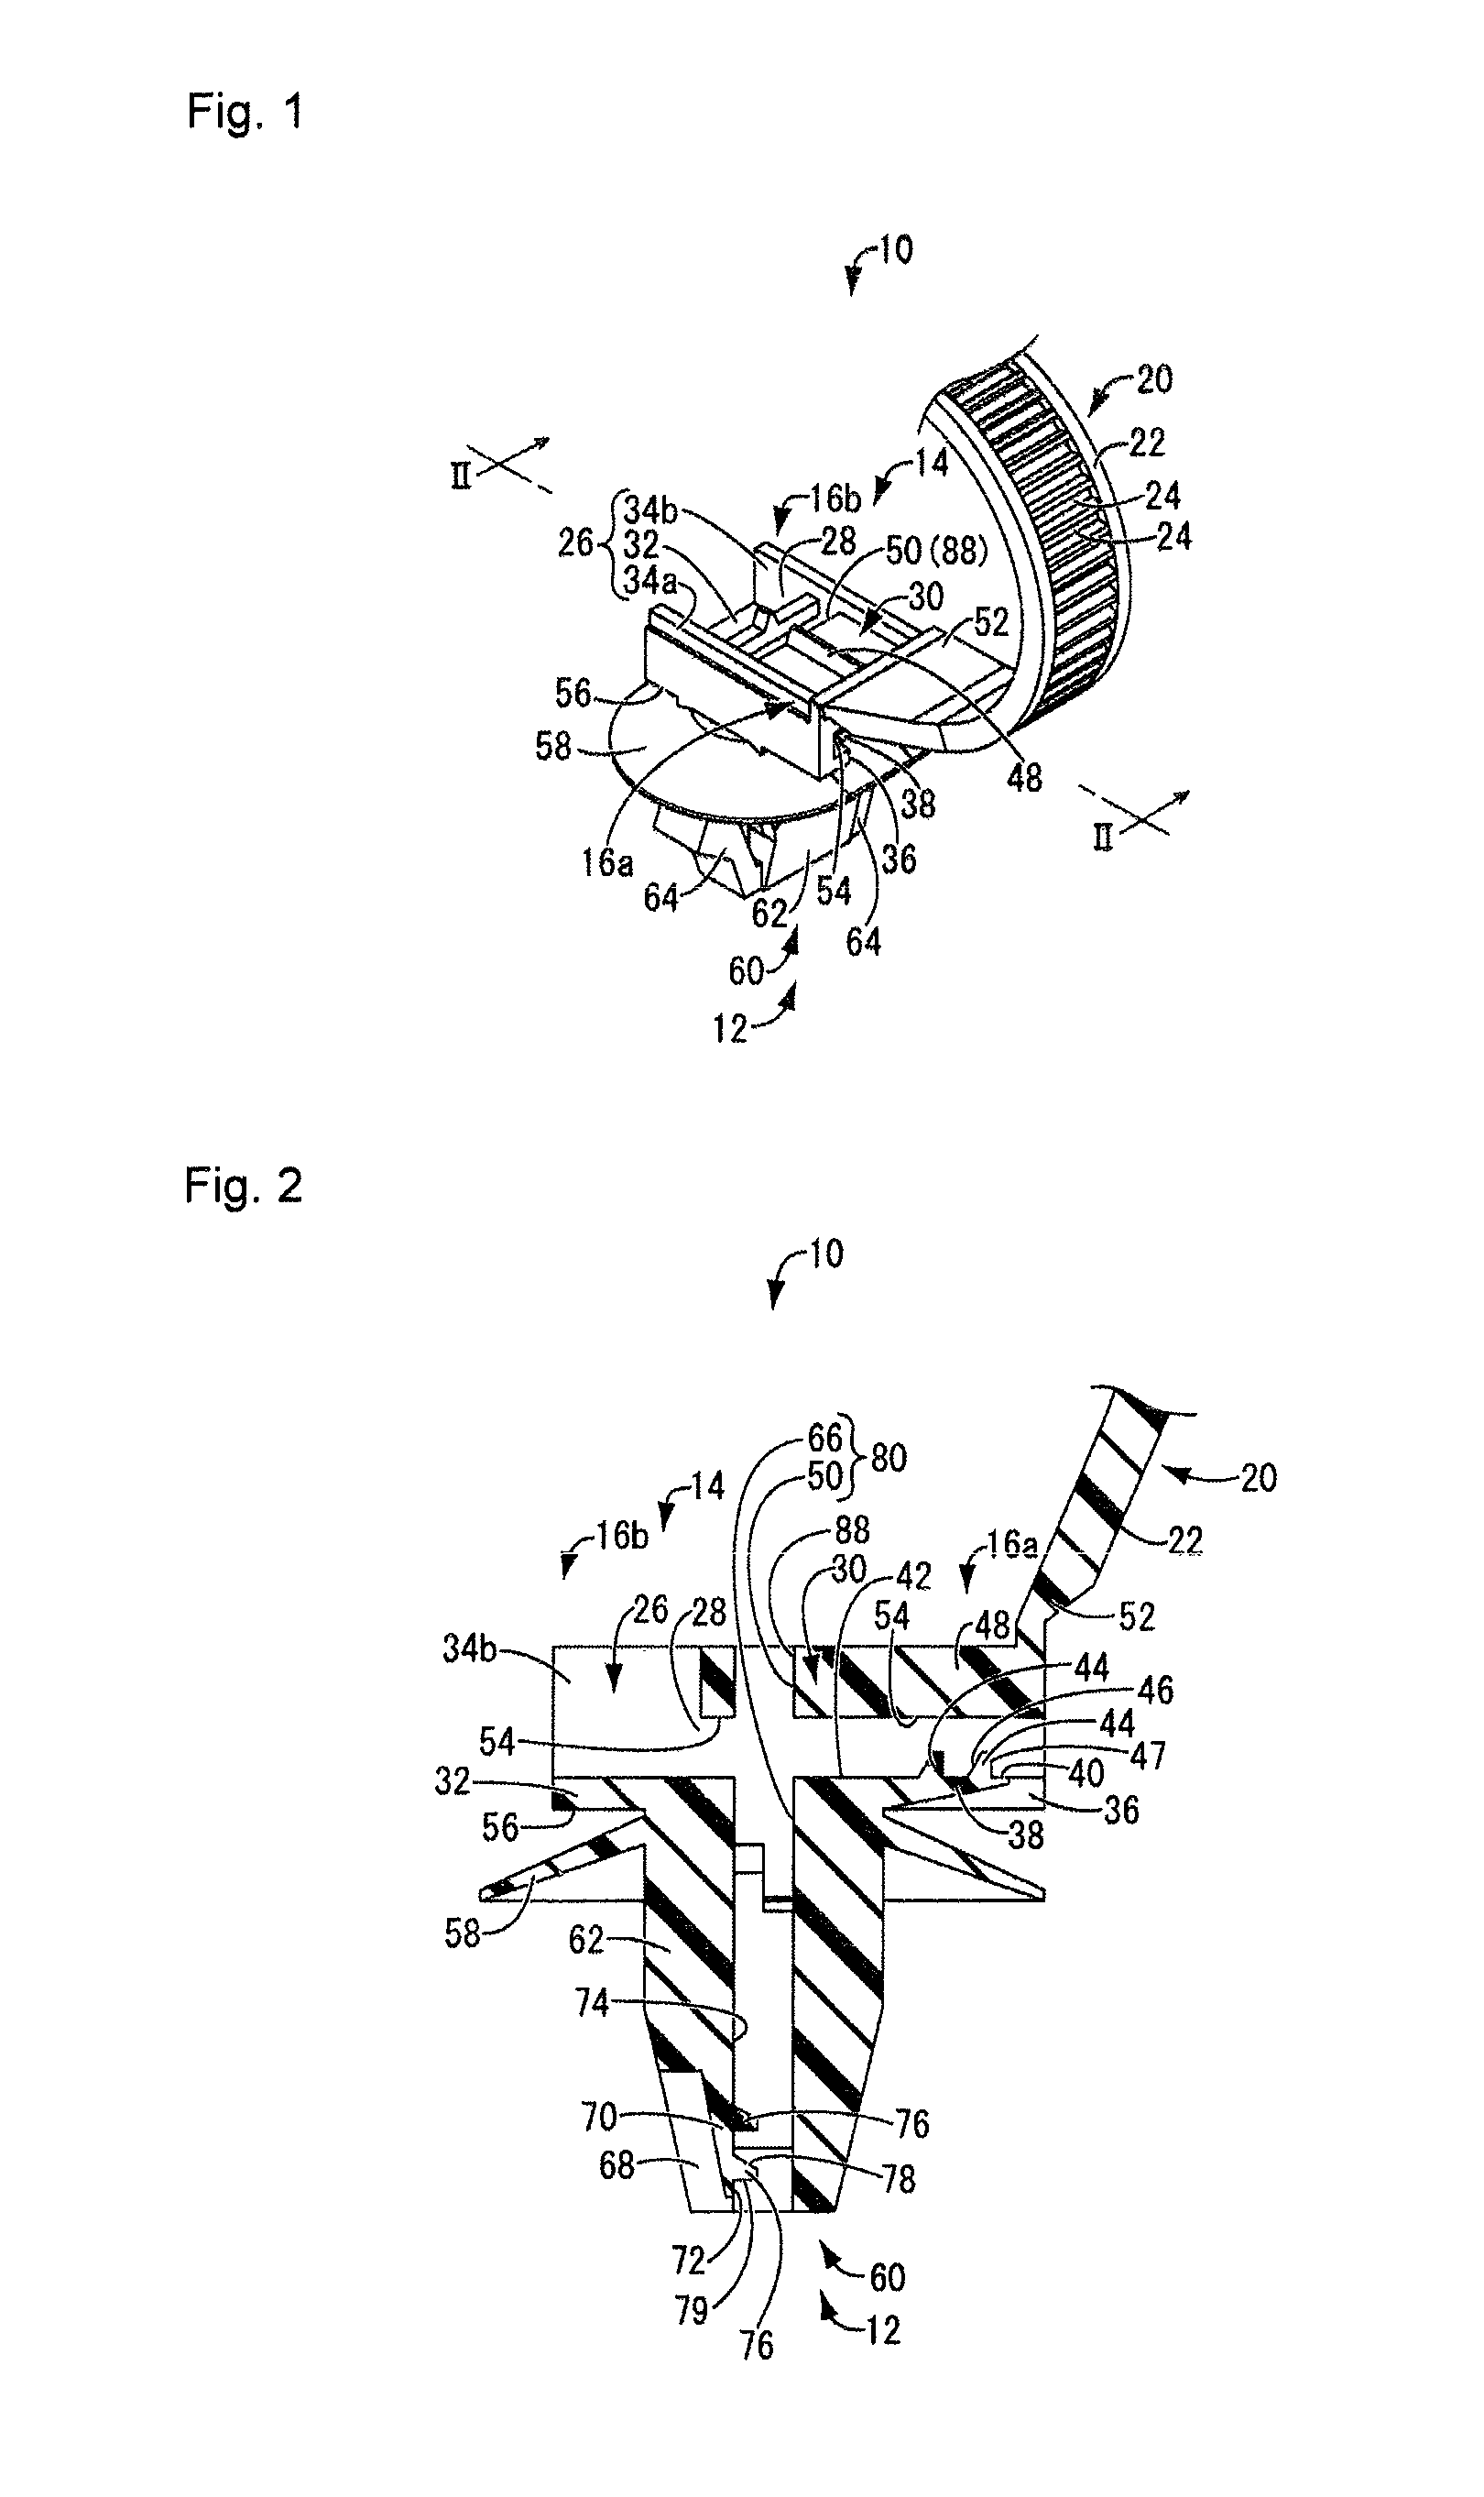 Wire harness fixture and method of producing wire harness with fixture having wire harness fixture attached thereto